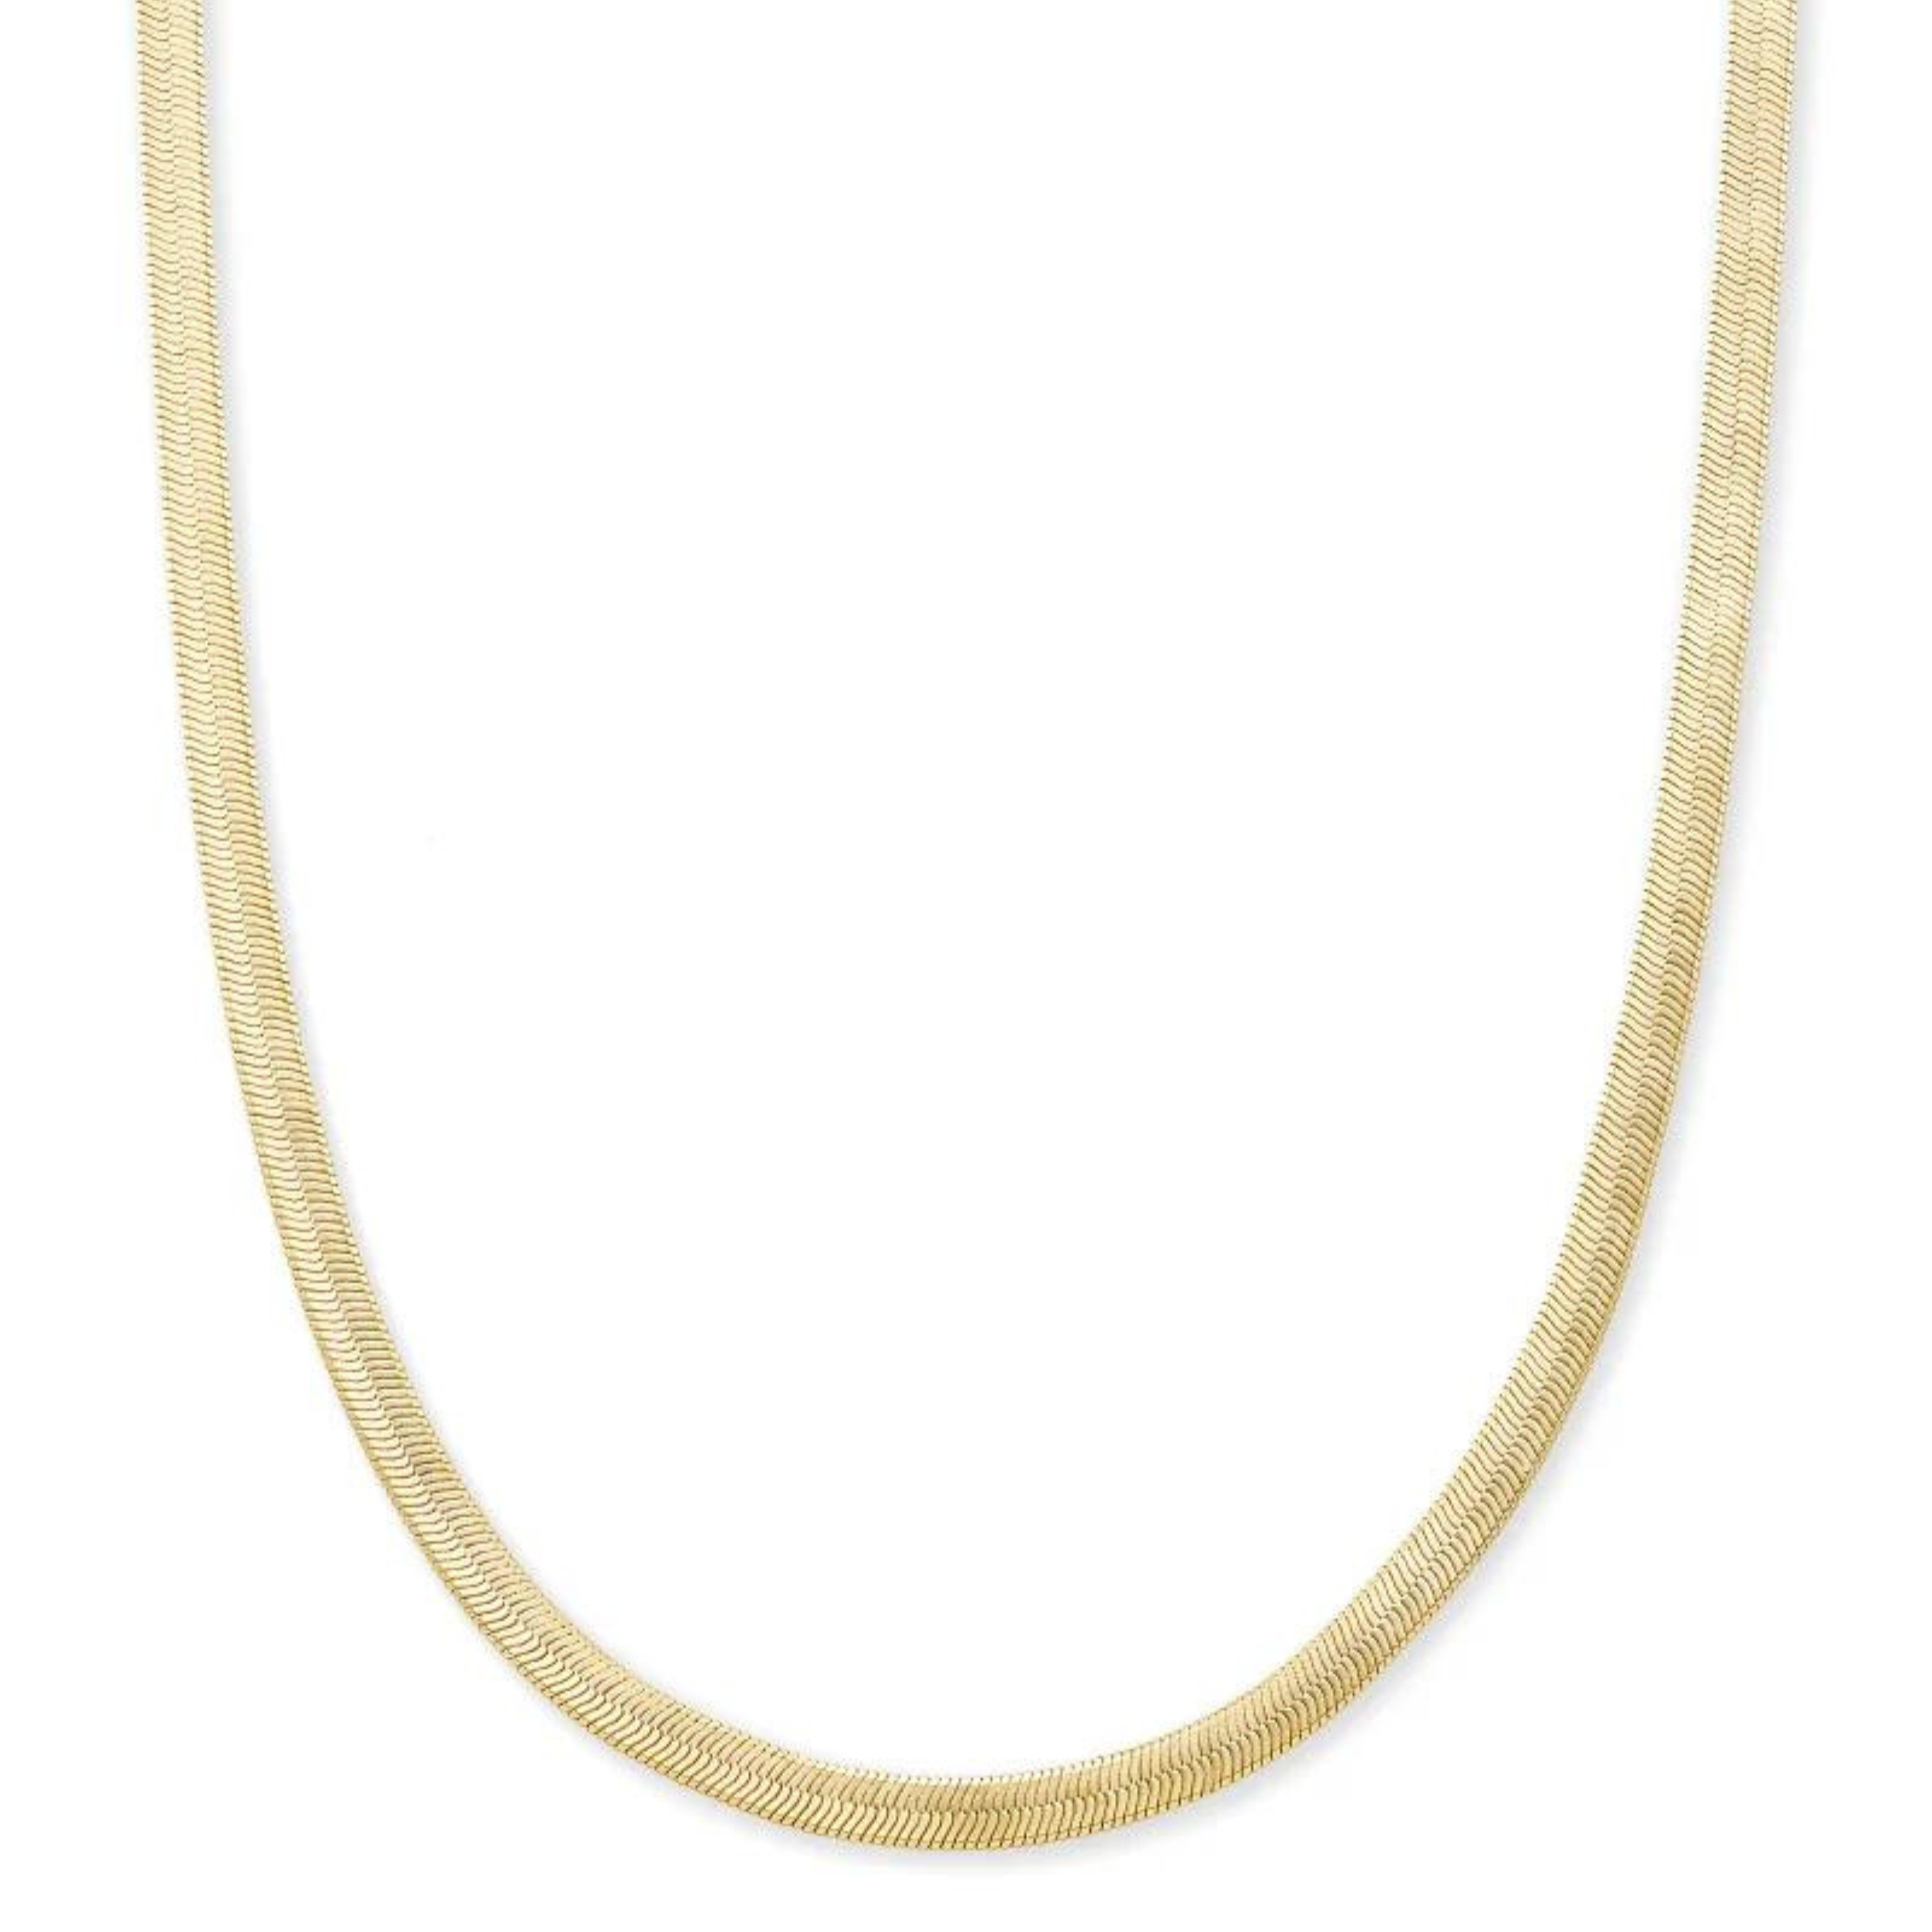 Gold herringbone chain necklace pictured on a white background. 